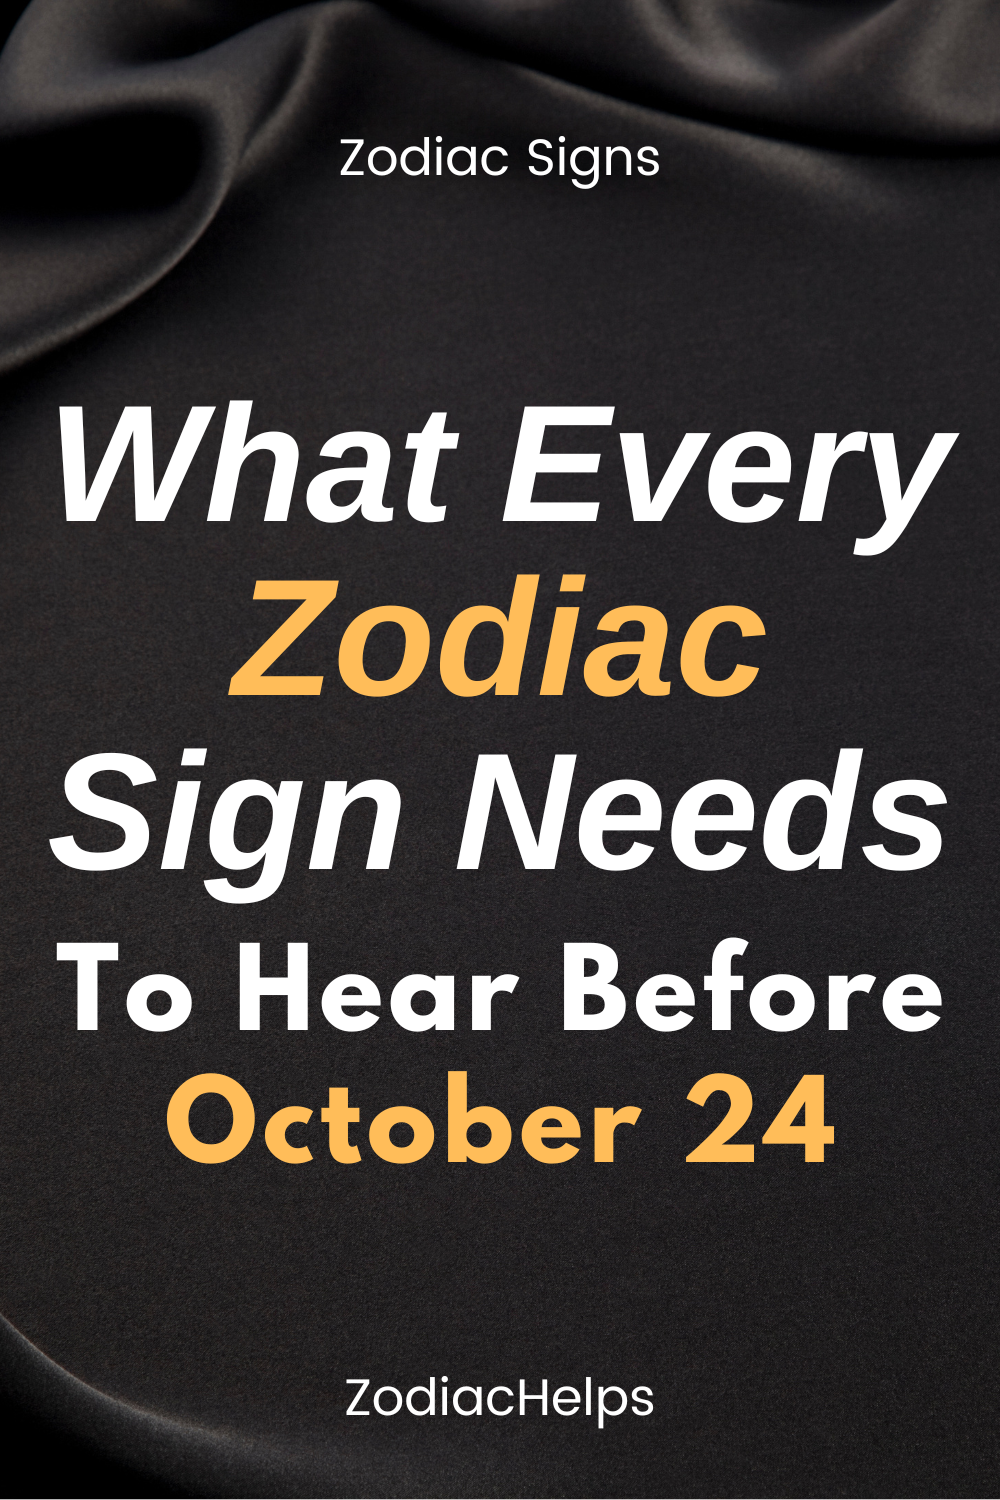 What Every Zodiac Sign Needs To Hear Before October 24